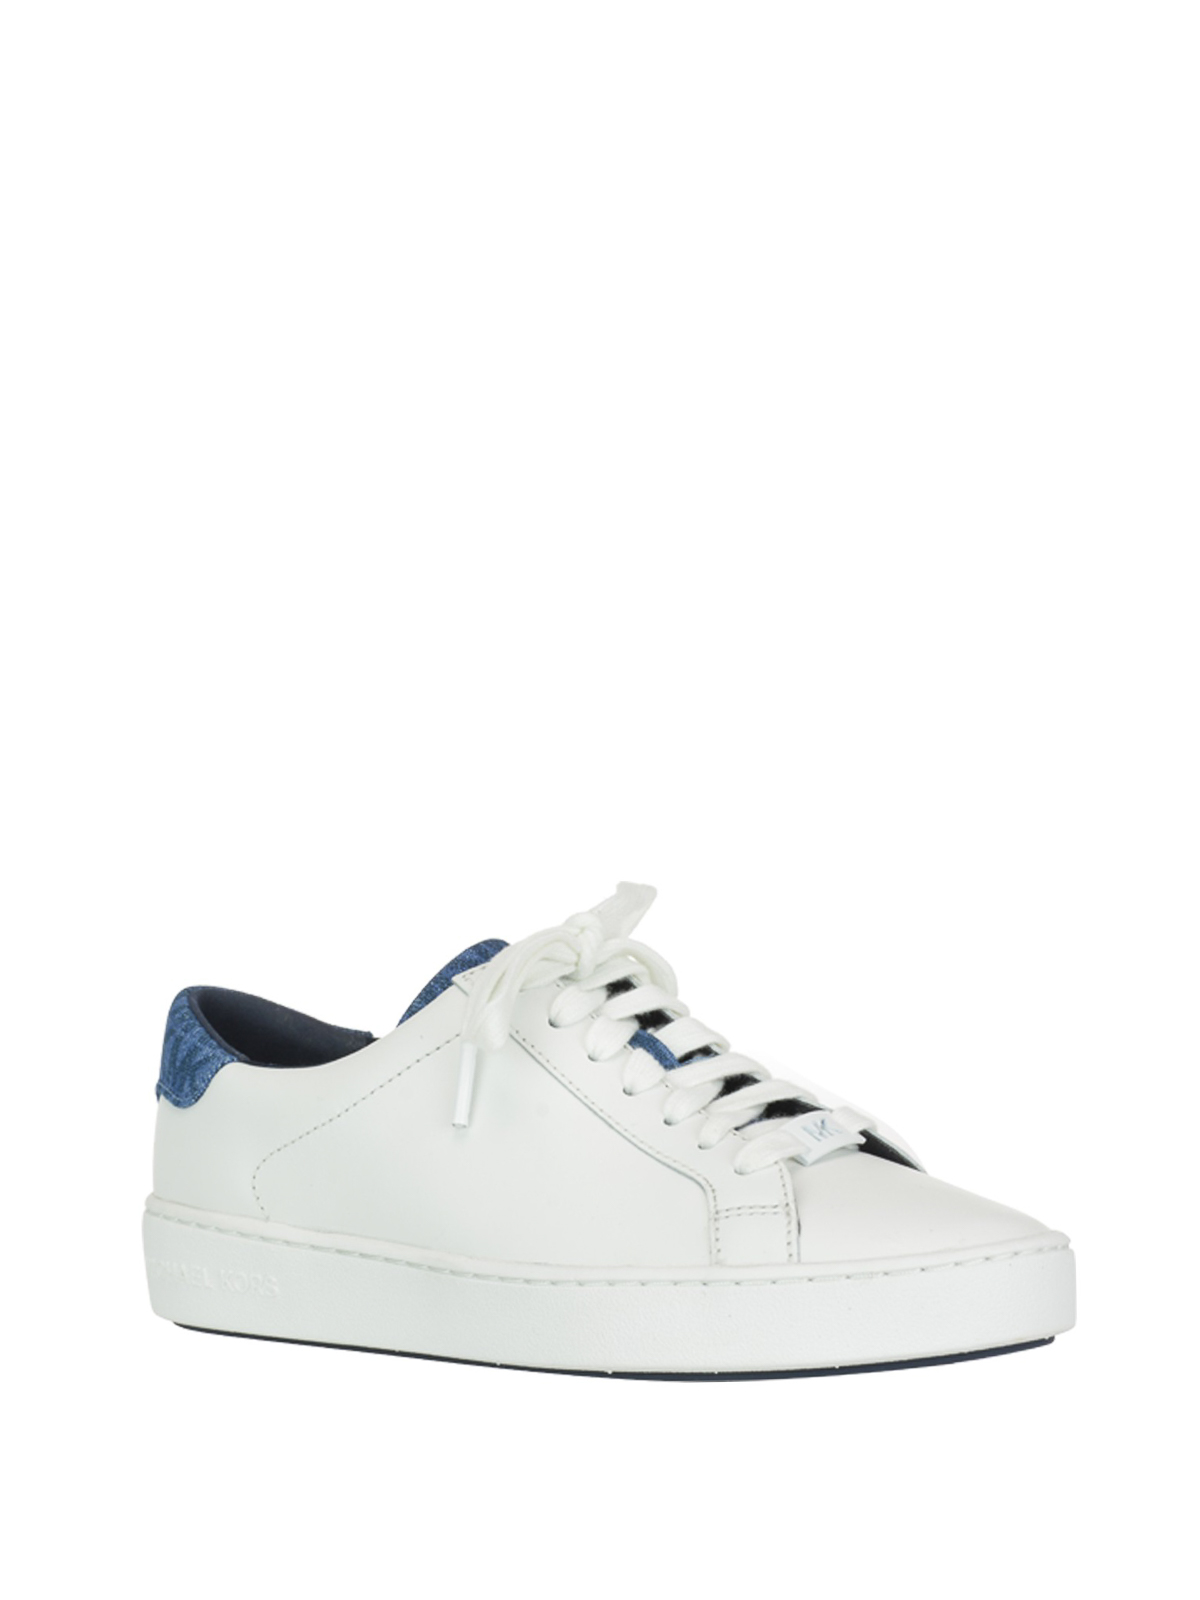 Trainers Michael Kors - Irving white leather and denim sneakers -  43S9IRFS2L085